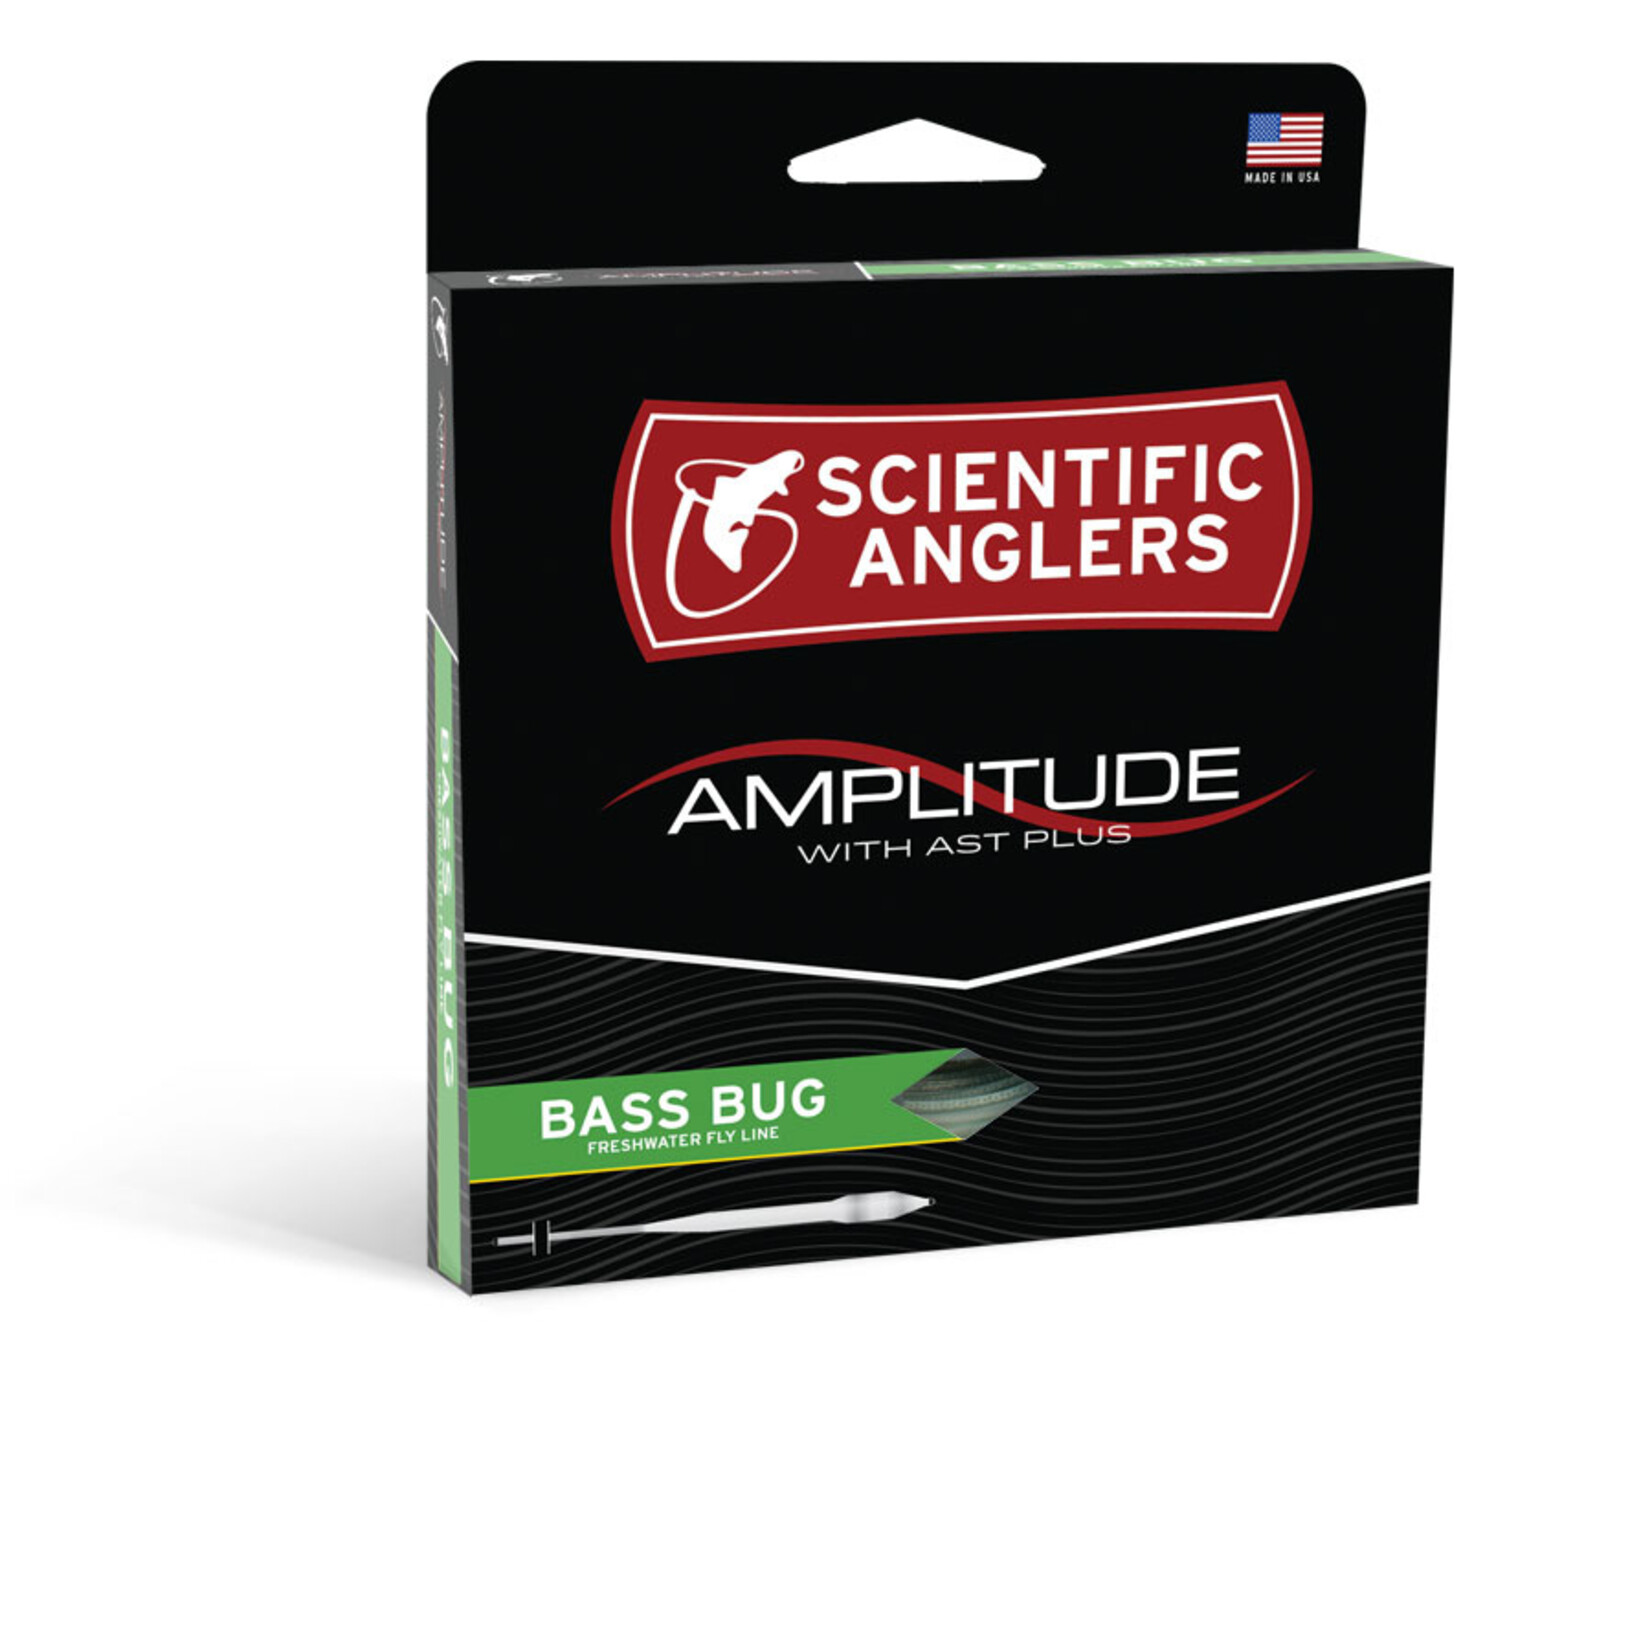 Scientific Anglers Scientific Anglers Amplitude Bass Bug Fly Line